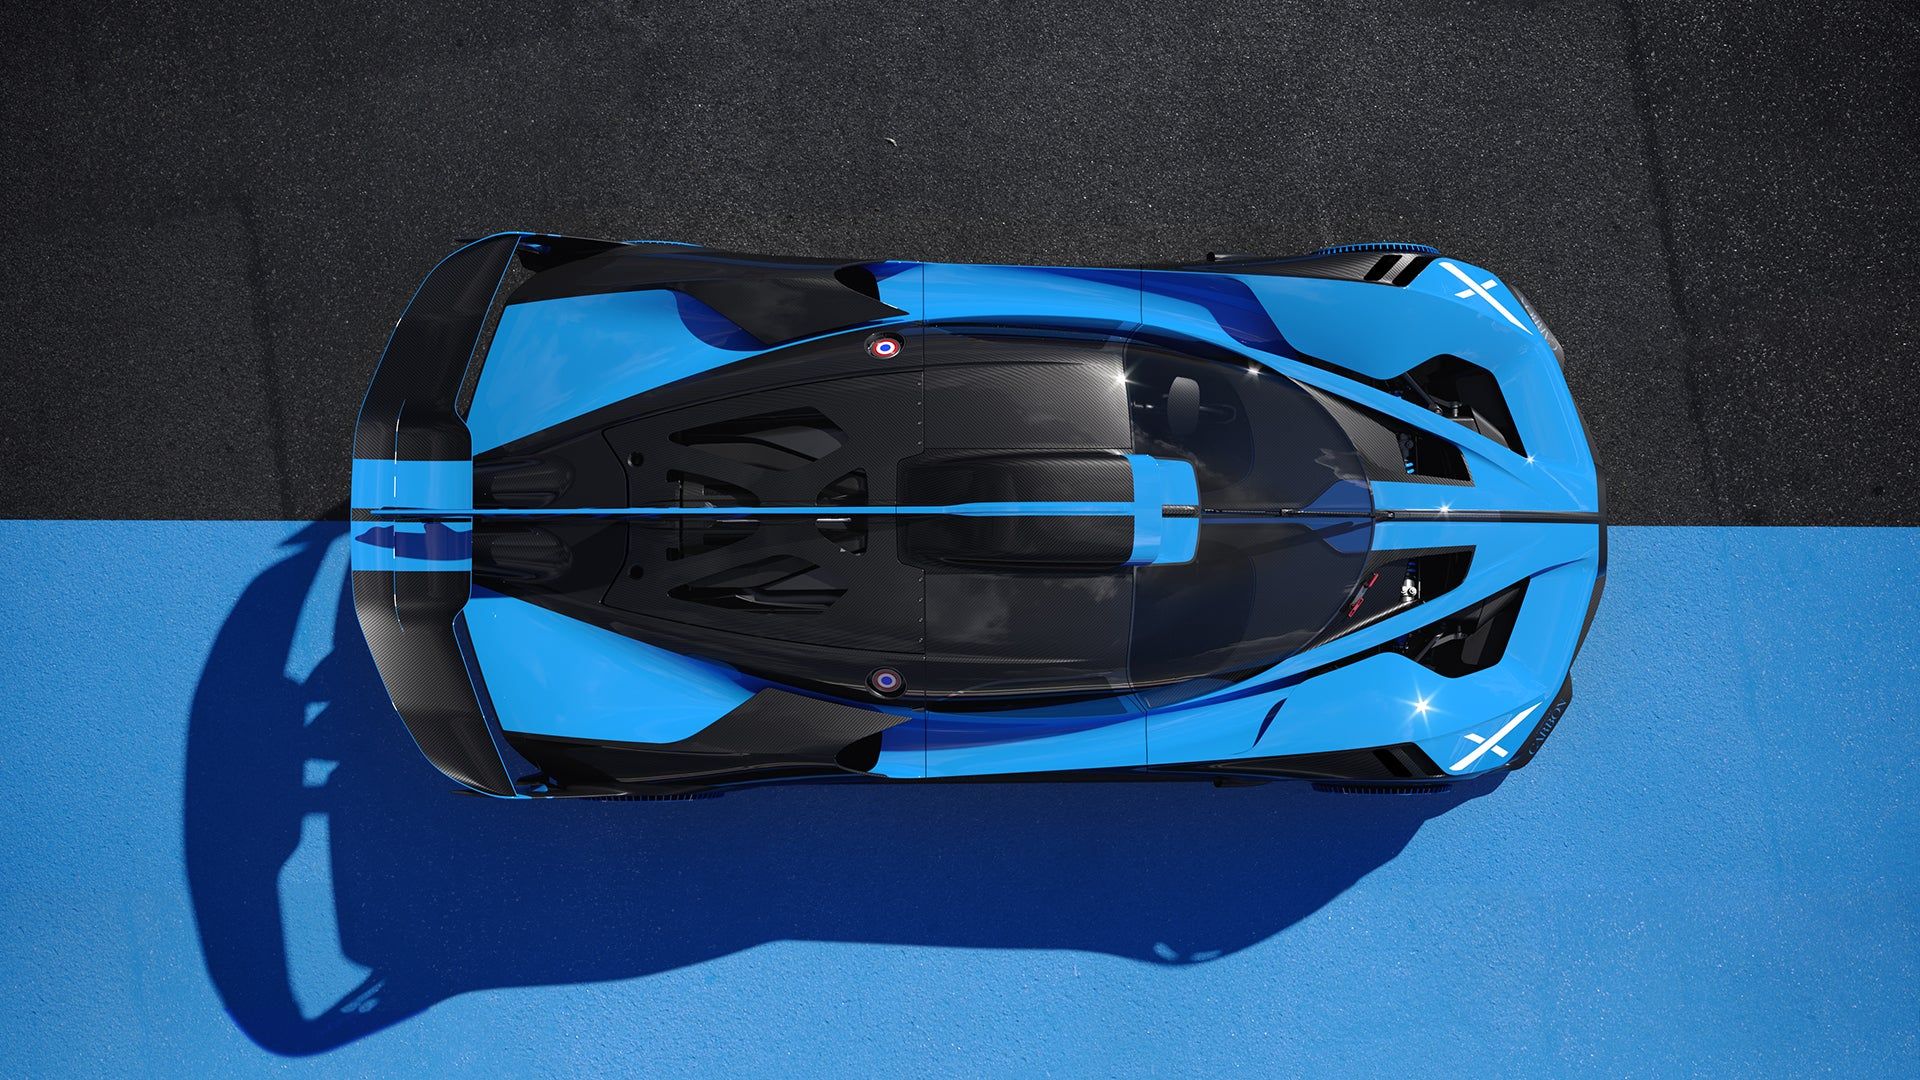 The Bugatti Bolide Concept Is An Ultralight Track Car With An 825 HP, 8.0 Liter W16 Engine